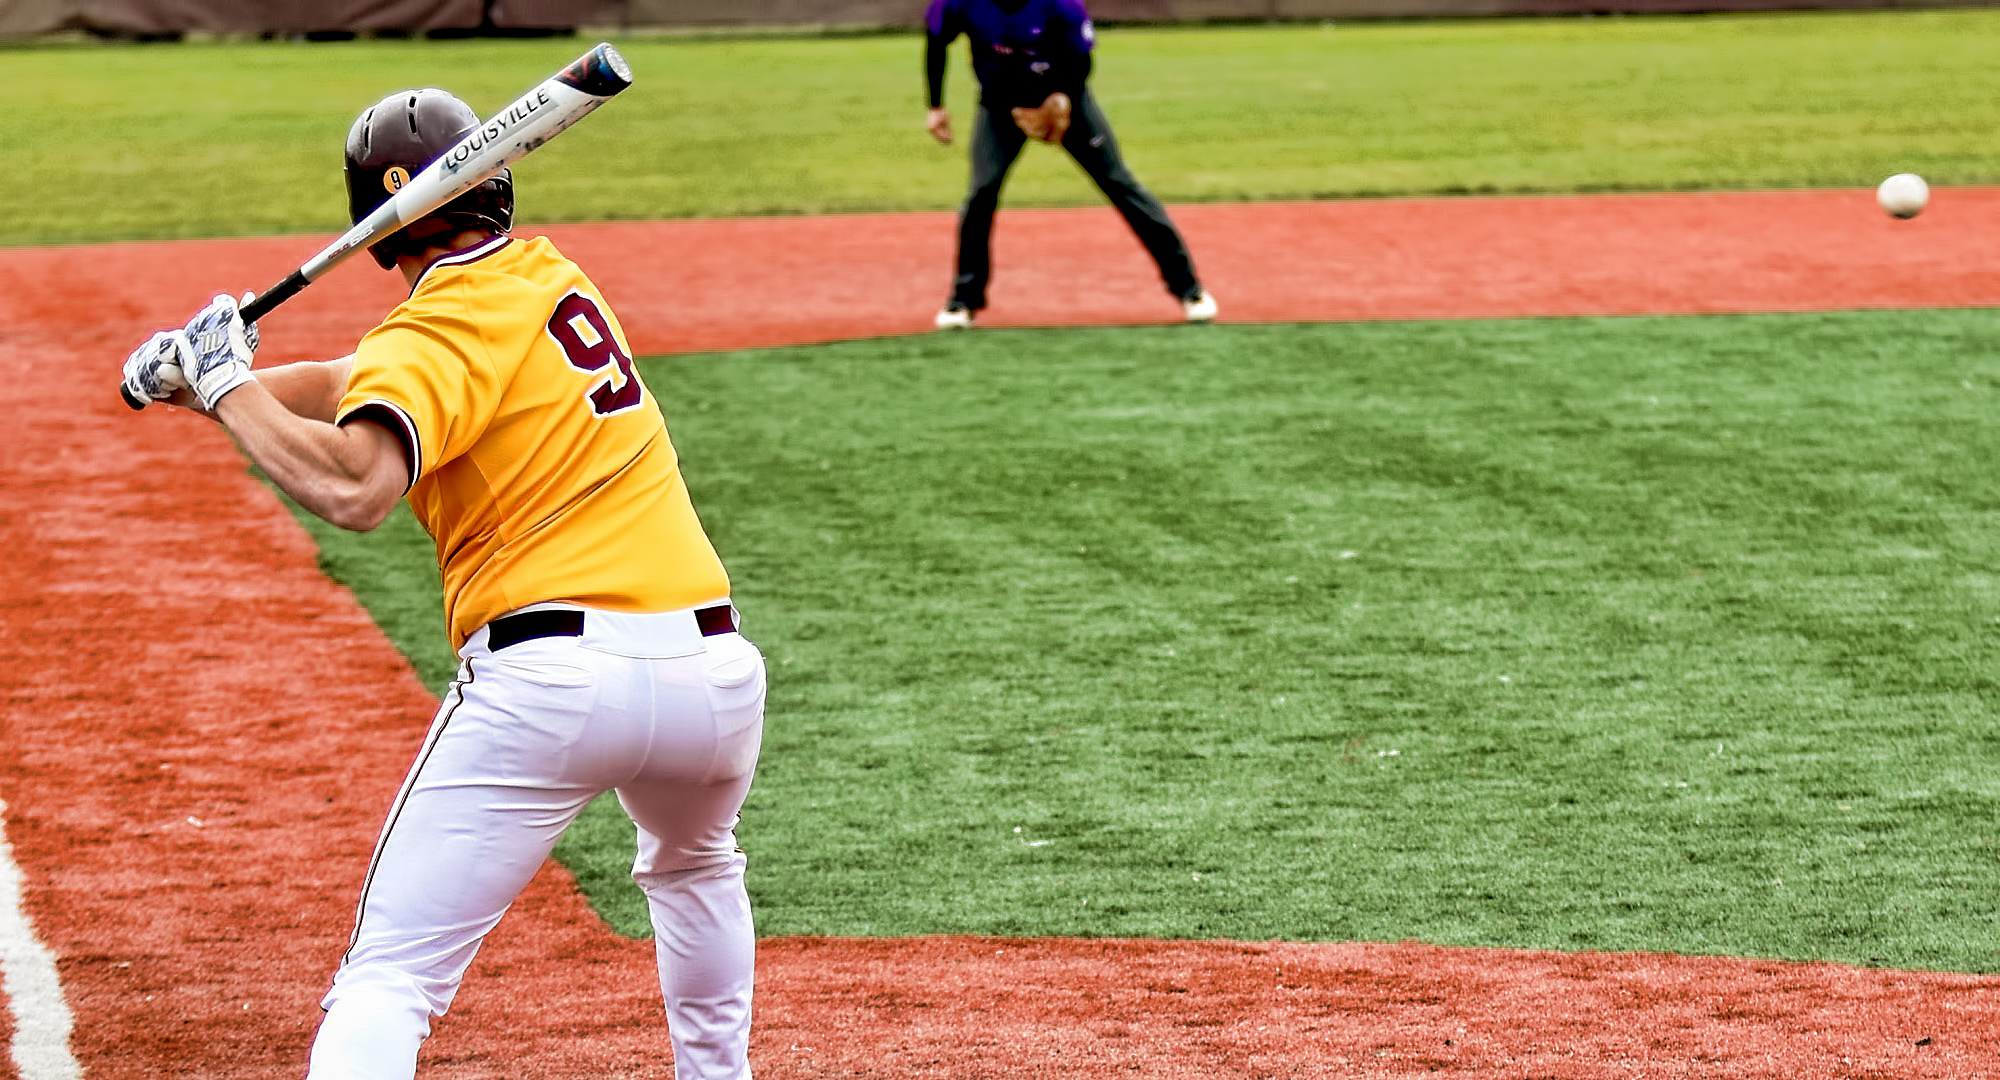 Sean McGuire hit his first college home run in the Cobbers split at Bethel.